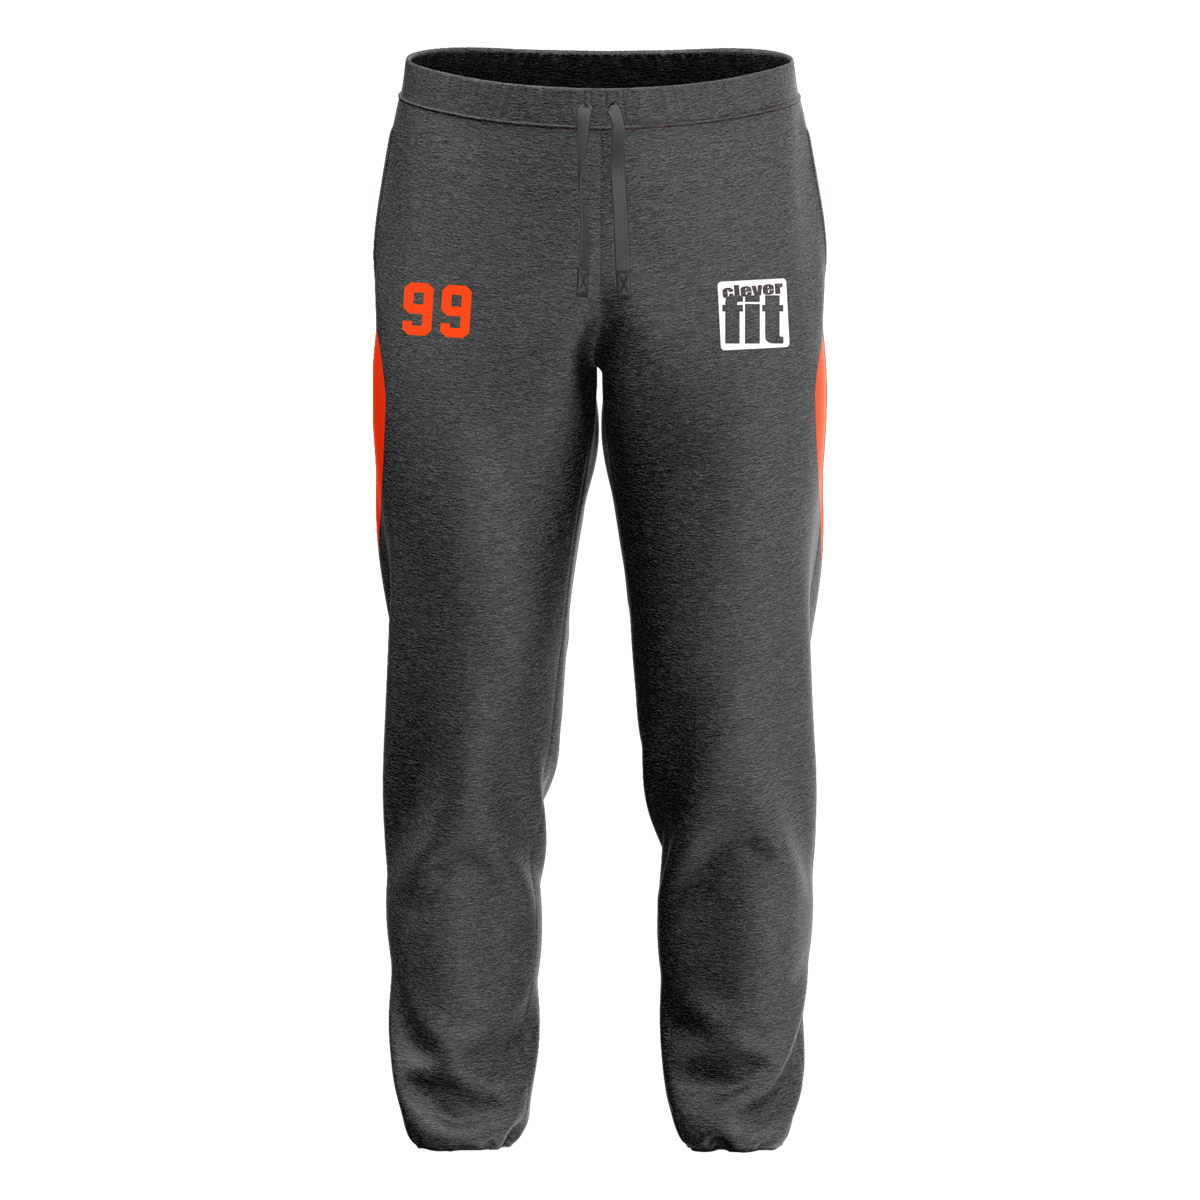 Foxes Signature Series Sweat Pant with cuffs with Playernumber/Initials